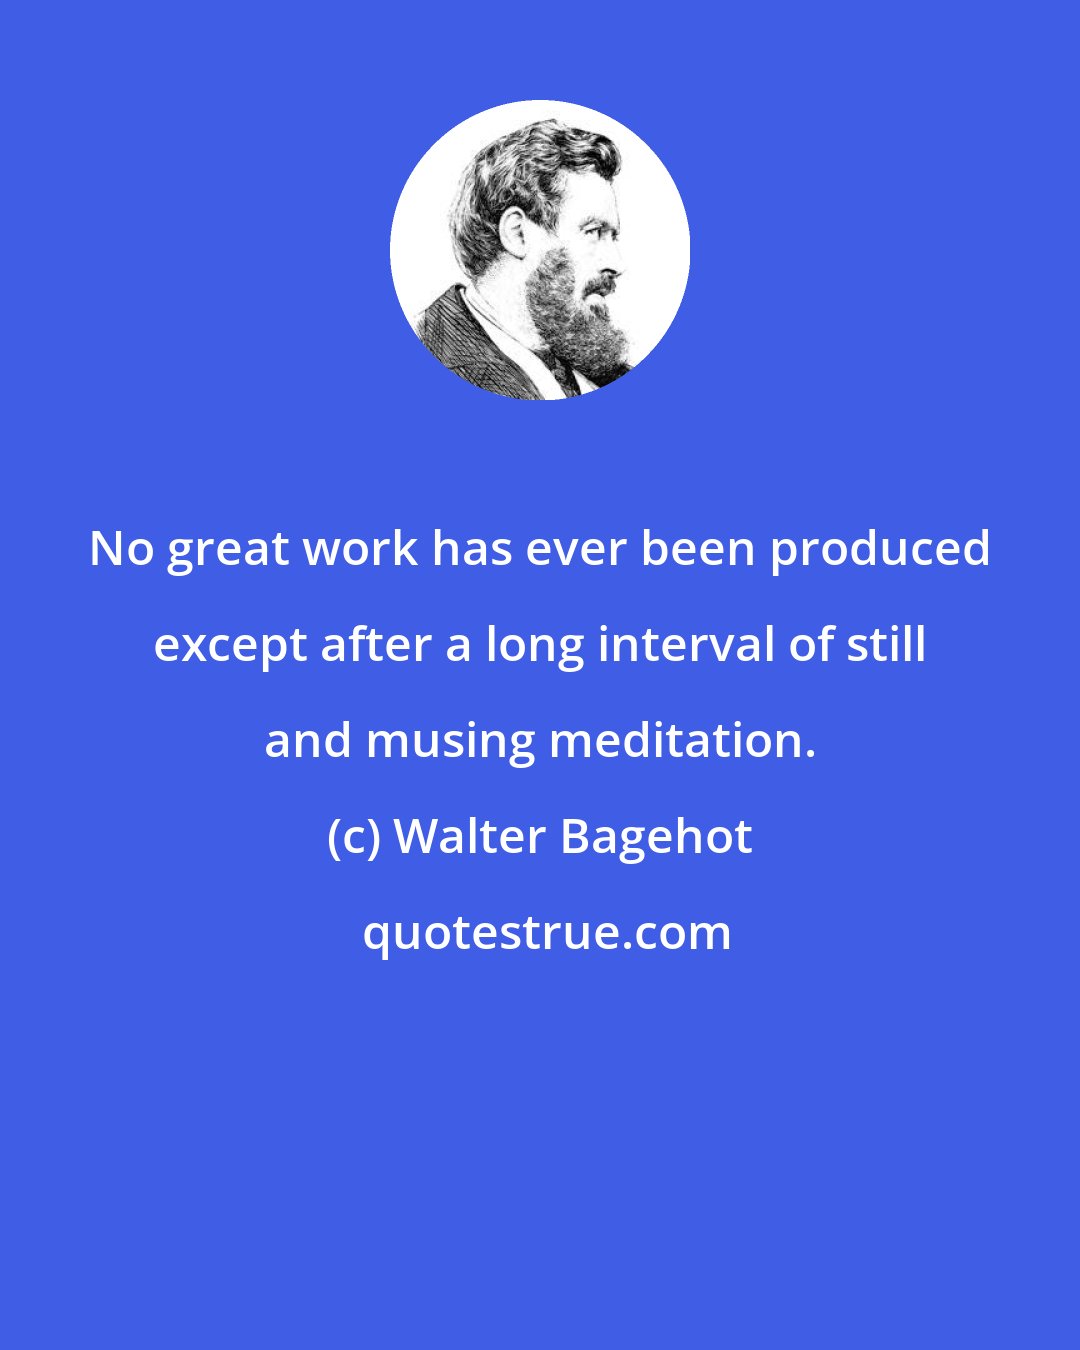 Walter Bagehot: No great work has ever been produced except after a long interval of still and musing meditation.